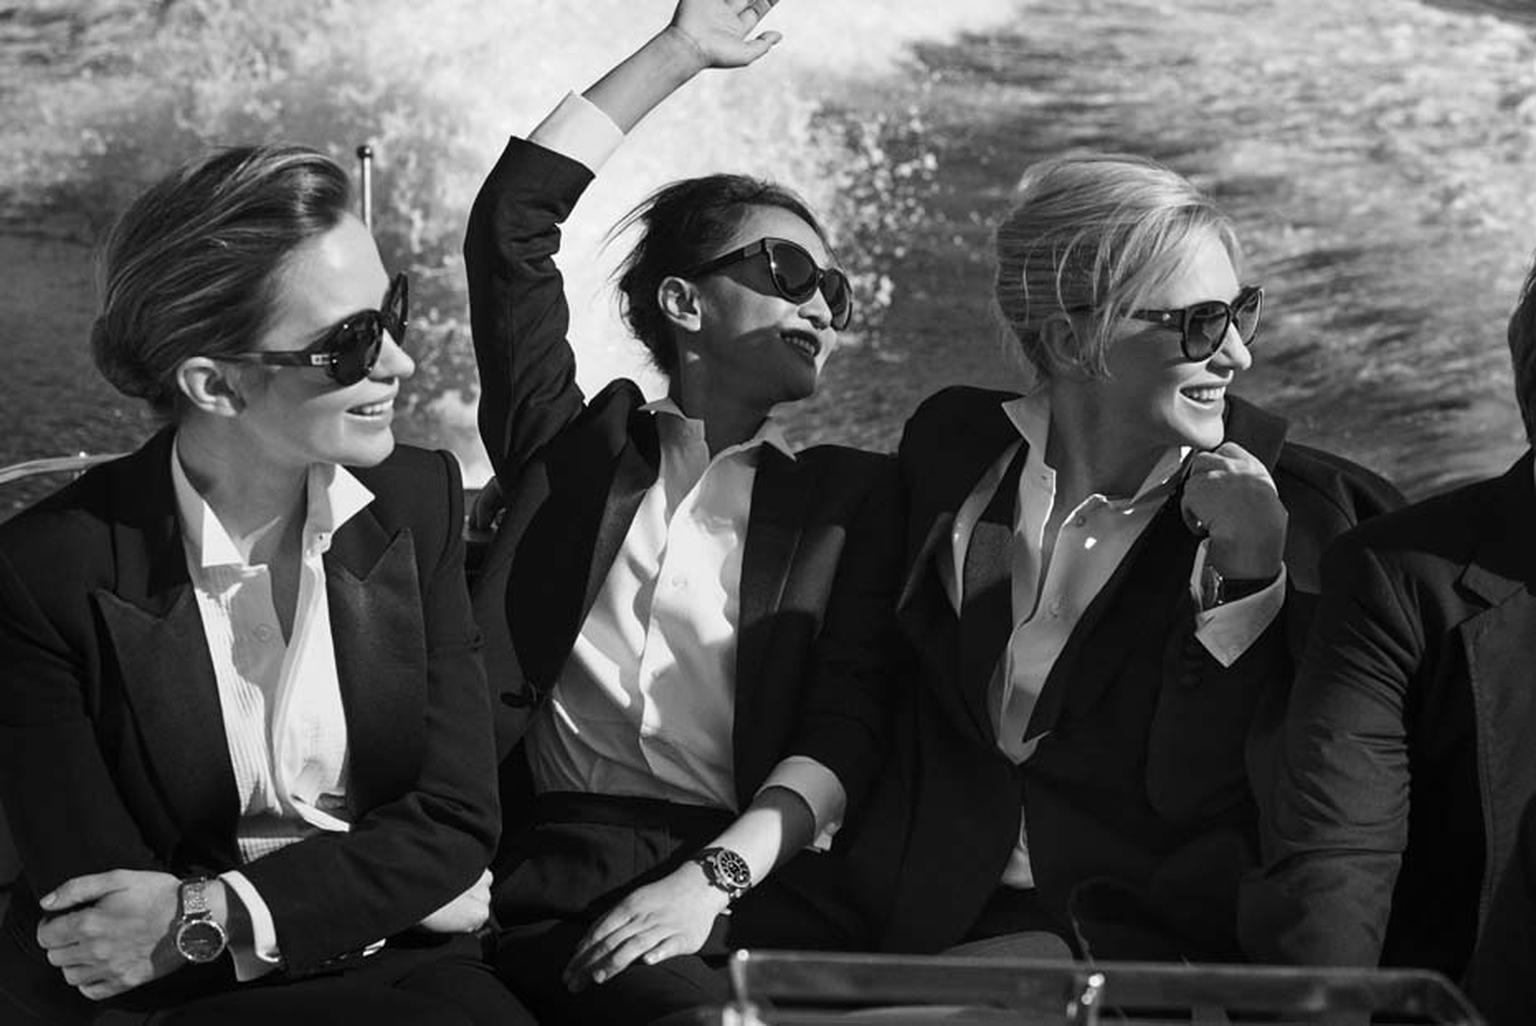 IWC's "Timeless Portofino" photo shoot features actresses Cate Blanchett, Emily Blunt and Zhou Xun, exuding grace and sophistication with chignons and black tuxedo blazers on board a Riva speedboat.